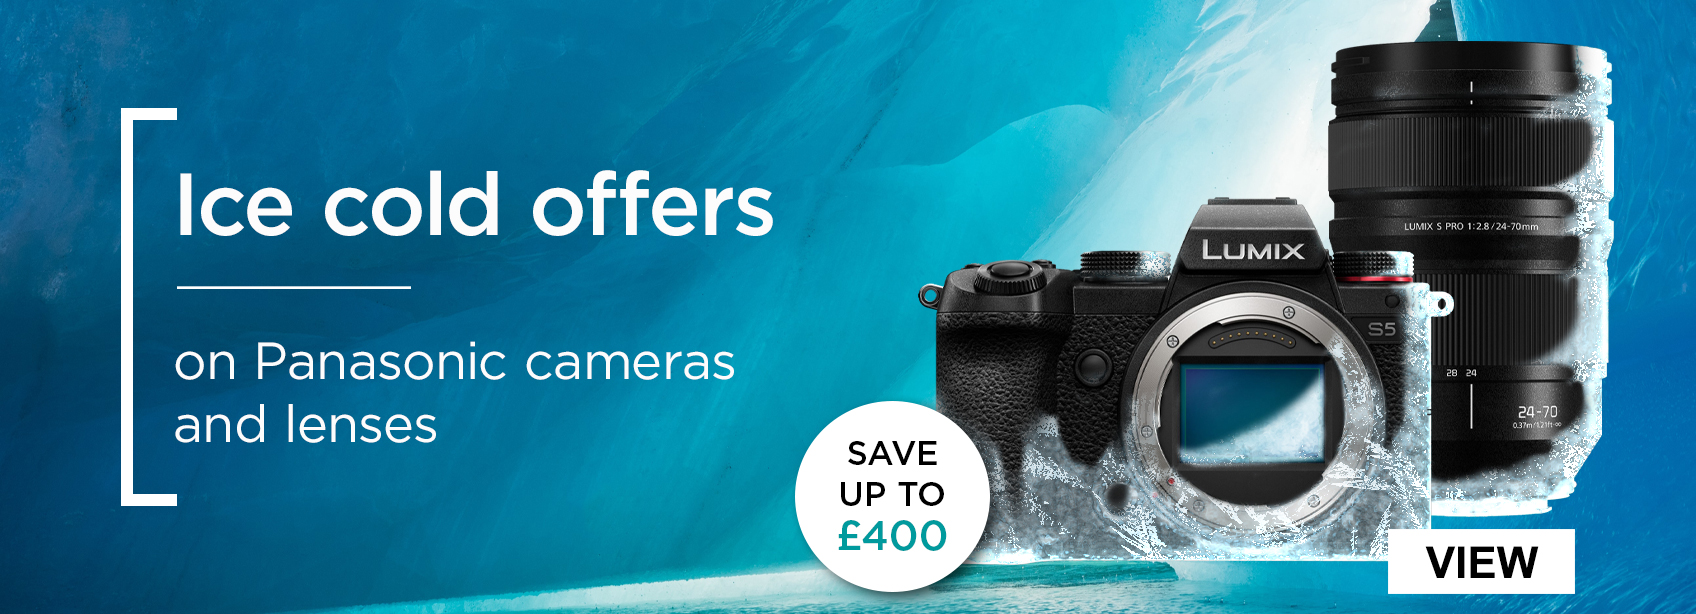 Ice cold offers on Panasonic cameras and lenses. Save up to £400. 